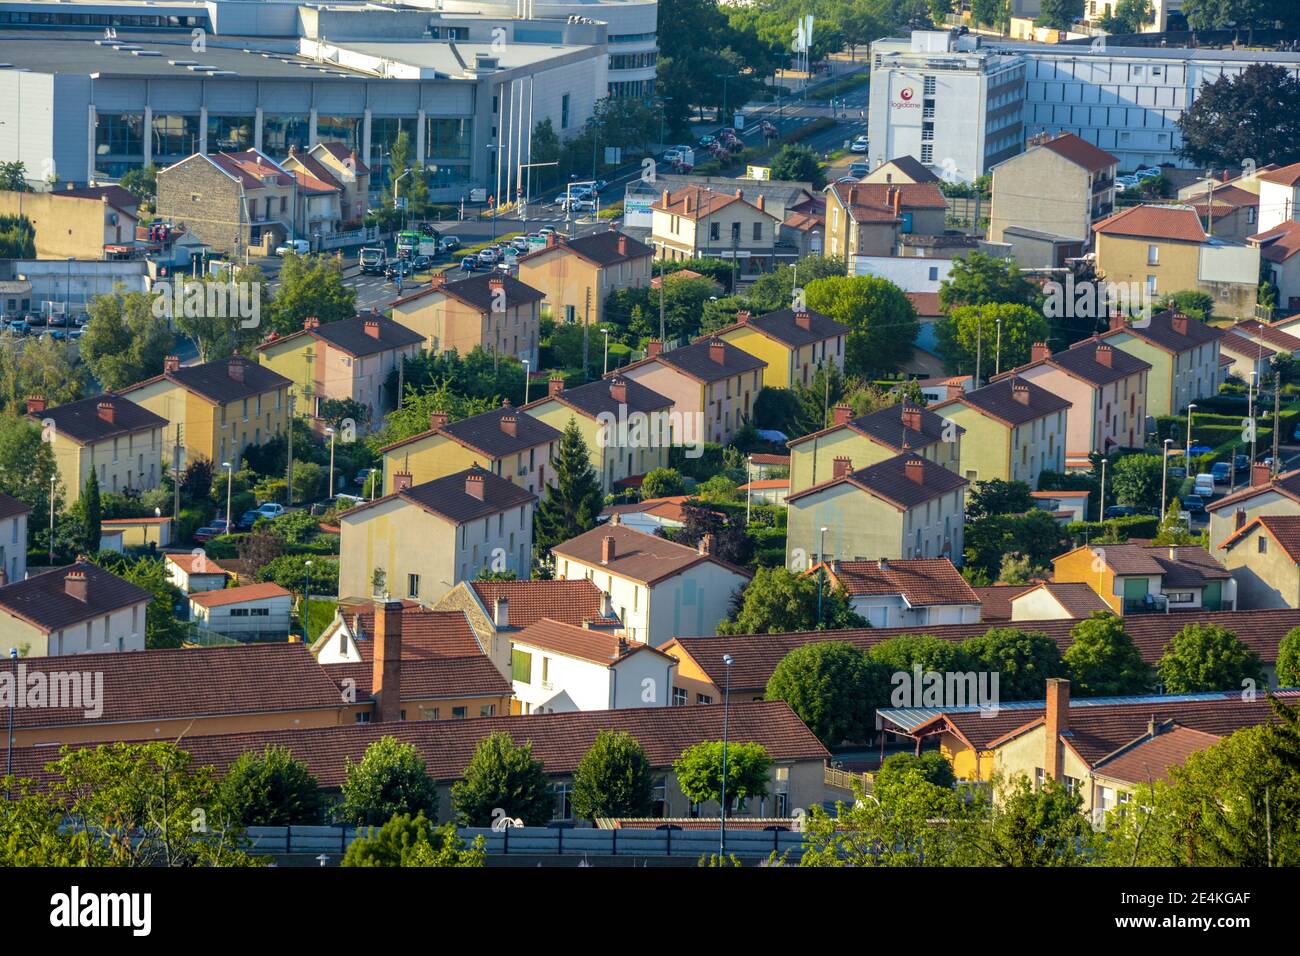 Citées Michelin, houses built by the Michelin company to house the working class population. Clermont Ferrand. Puy de Dome. Auvergne. France Stock Photo